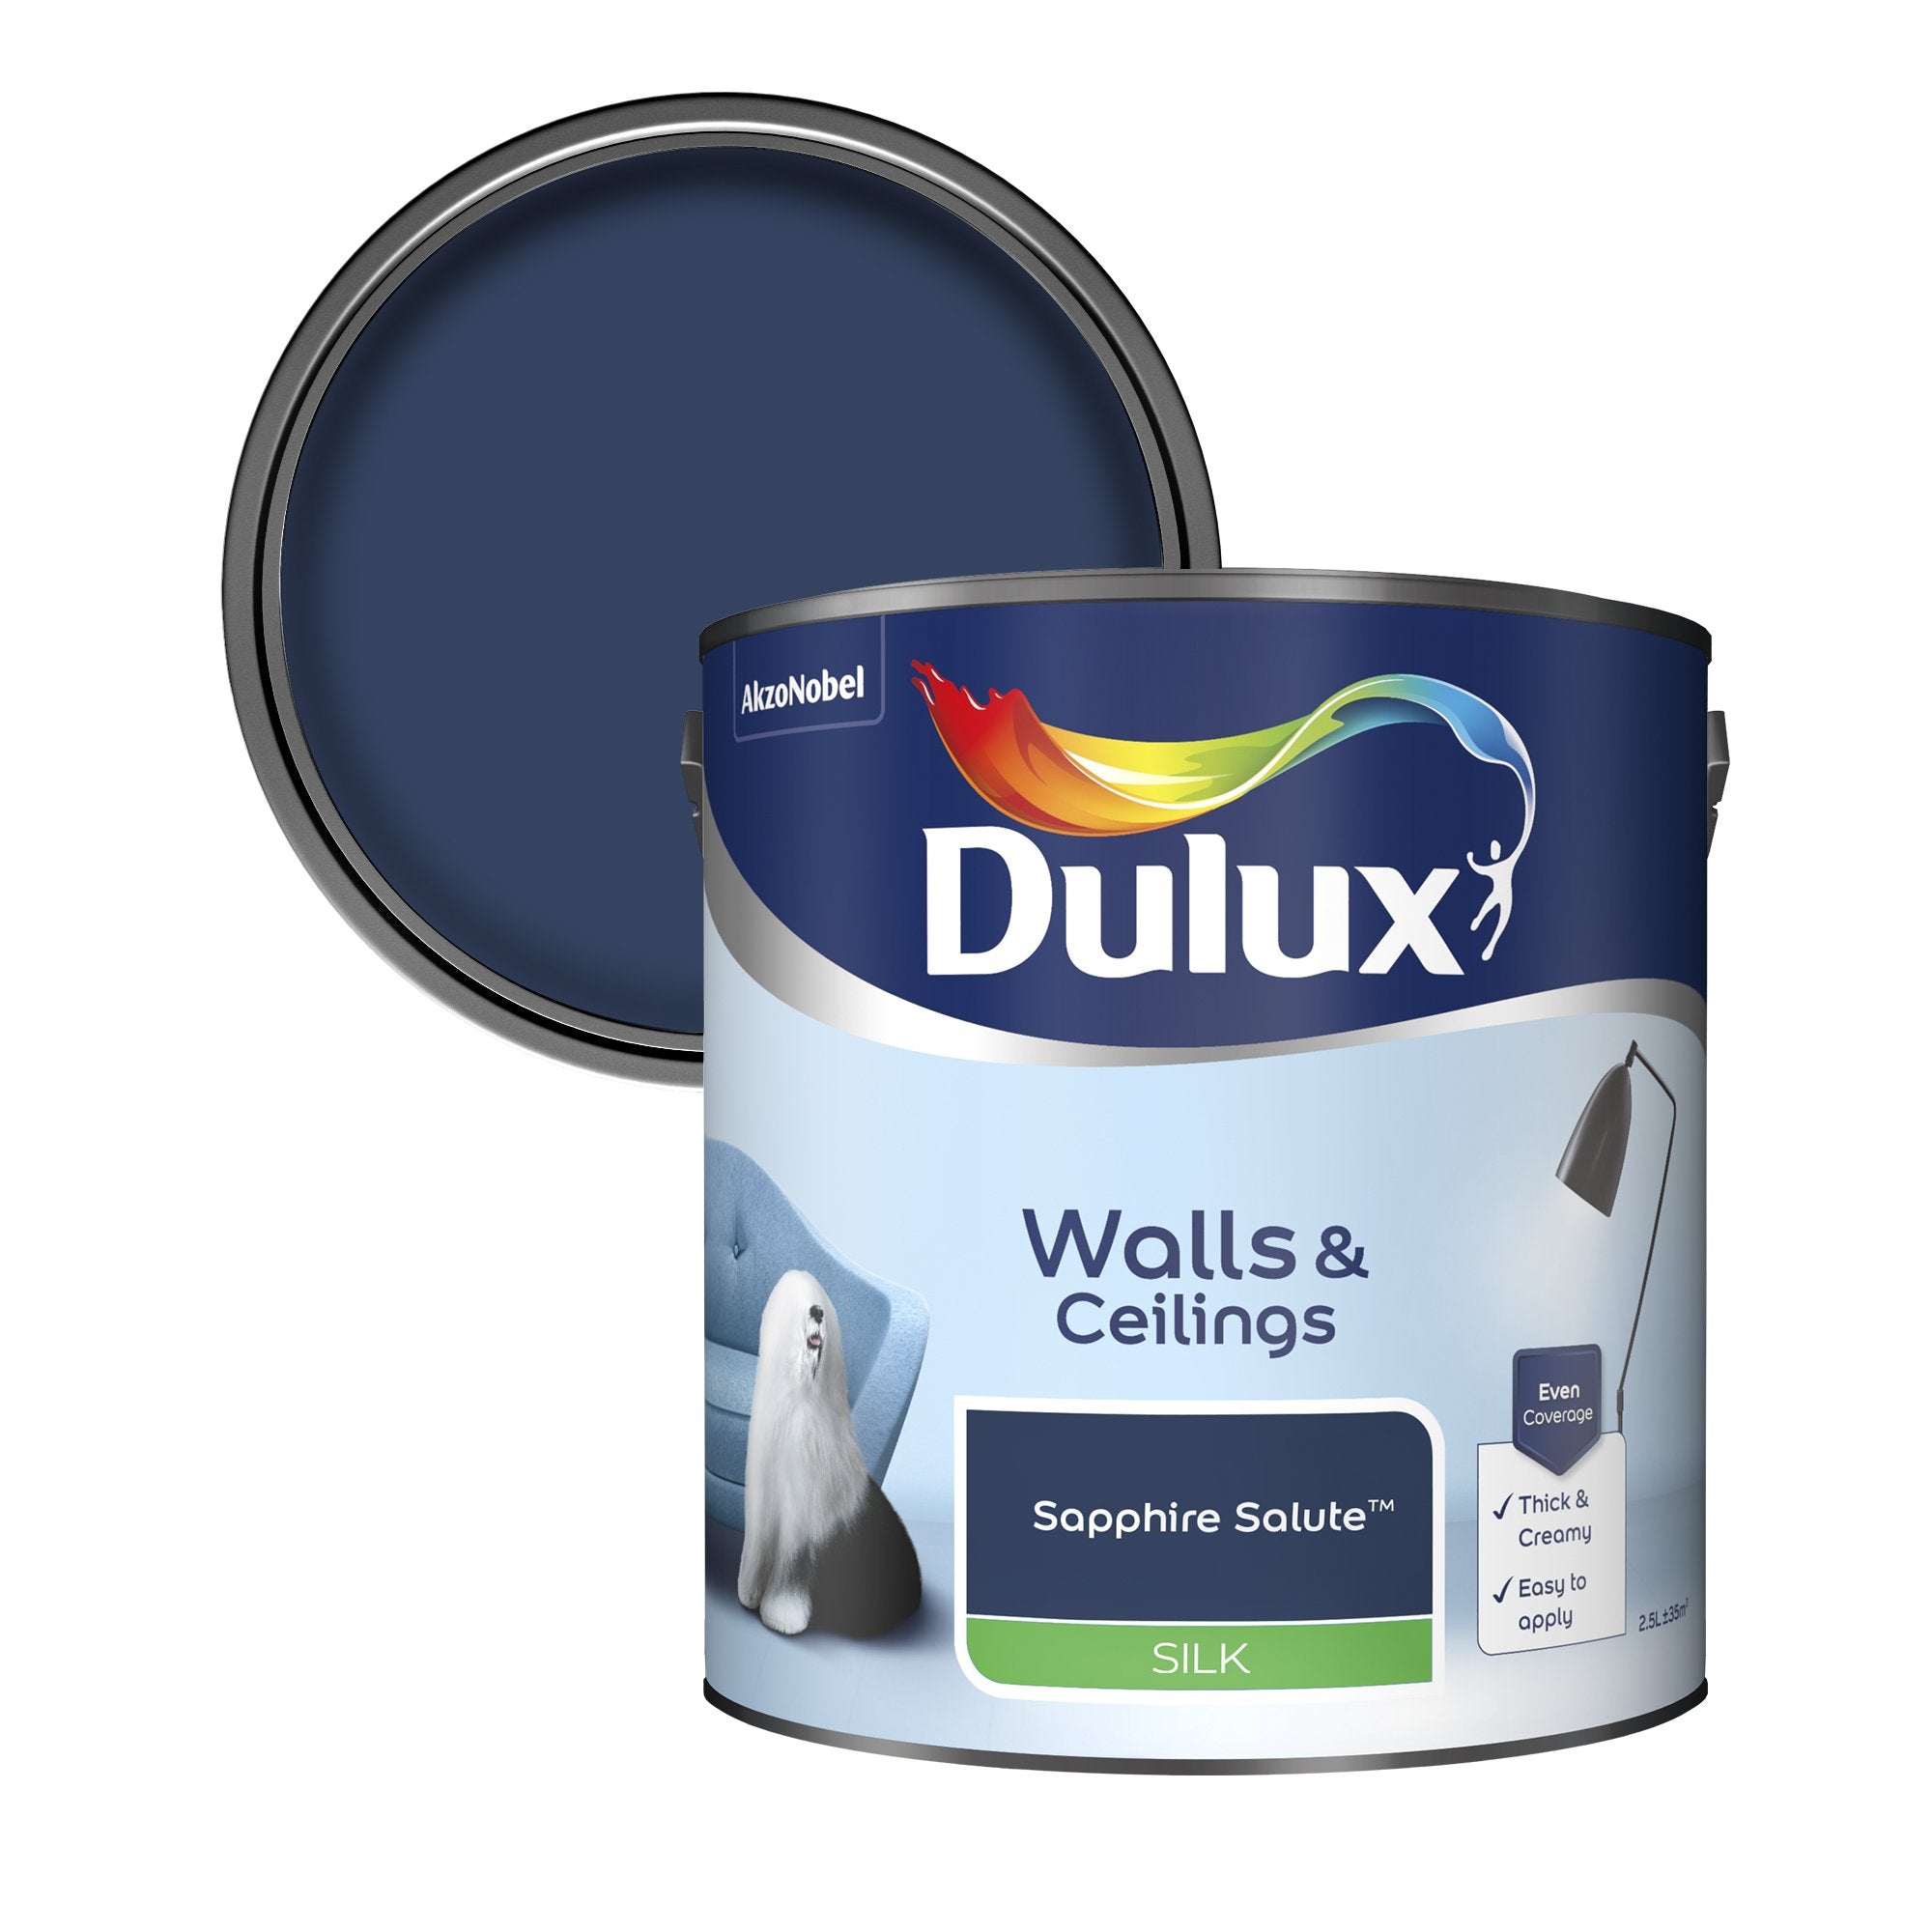 Dulux-Silk-Emulsion-Paint-For-Walls-And-Ceilings-Sapphire-Salute-2.5L